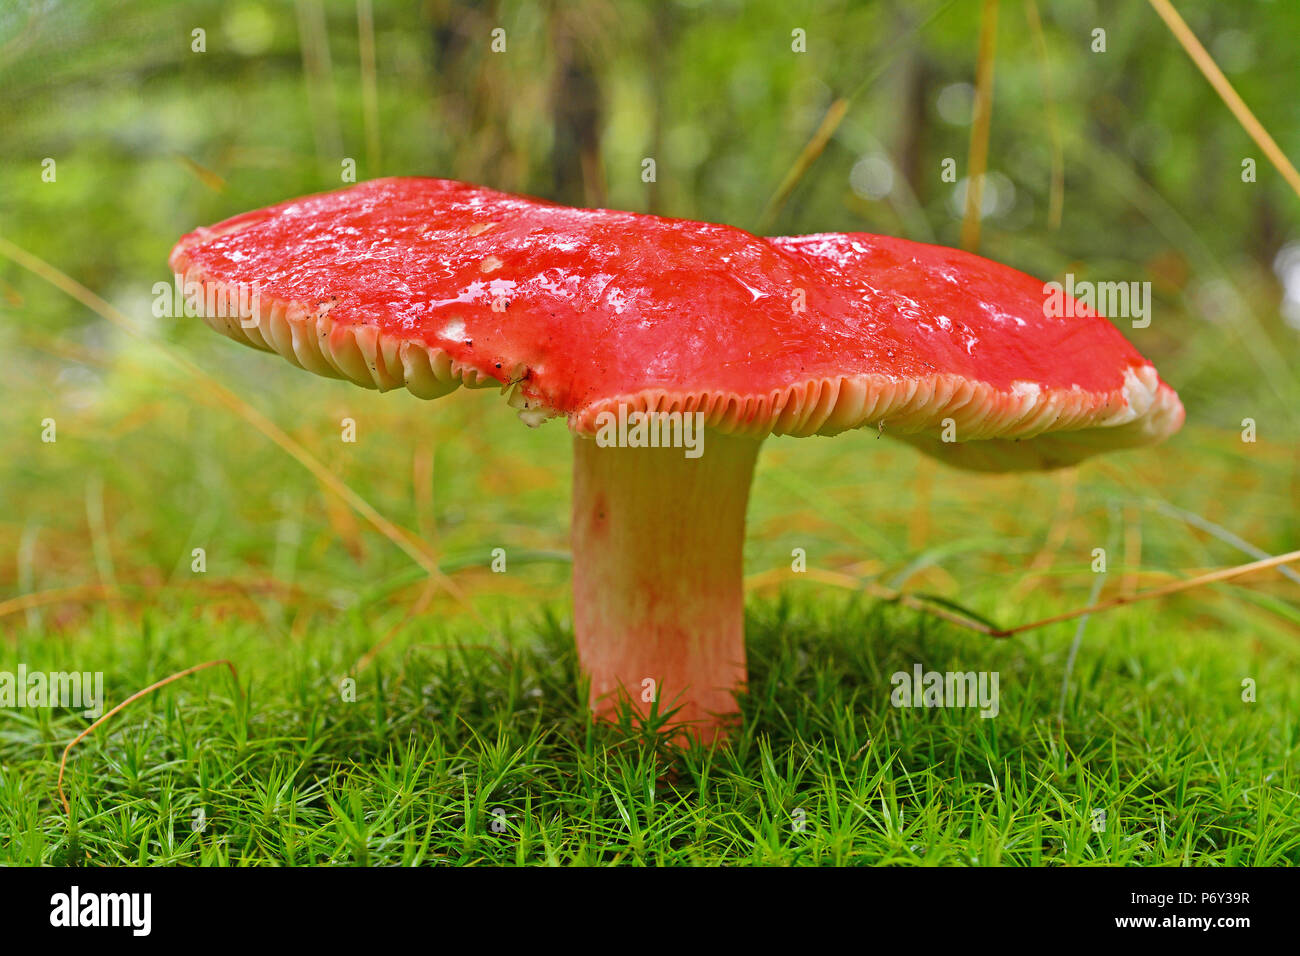 russula sanguinaria mushroom in the forest Stock Photo